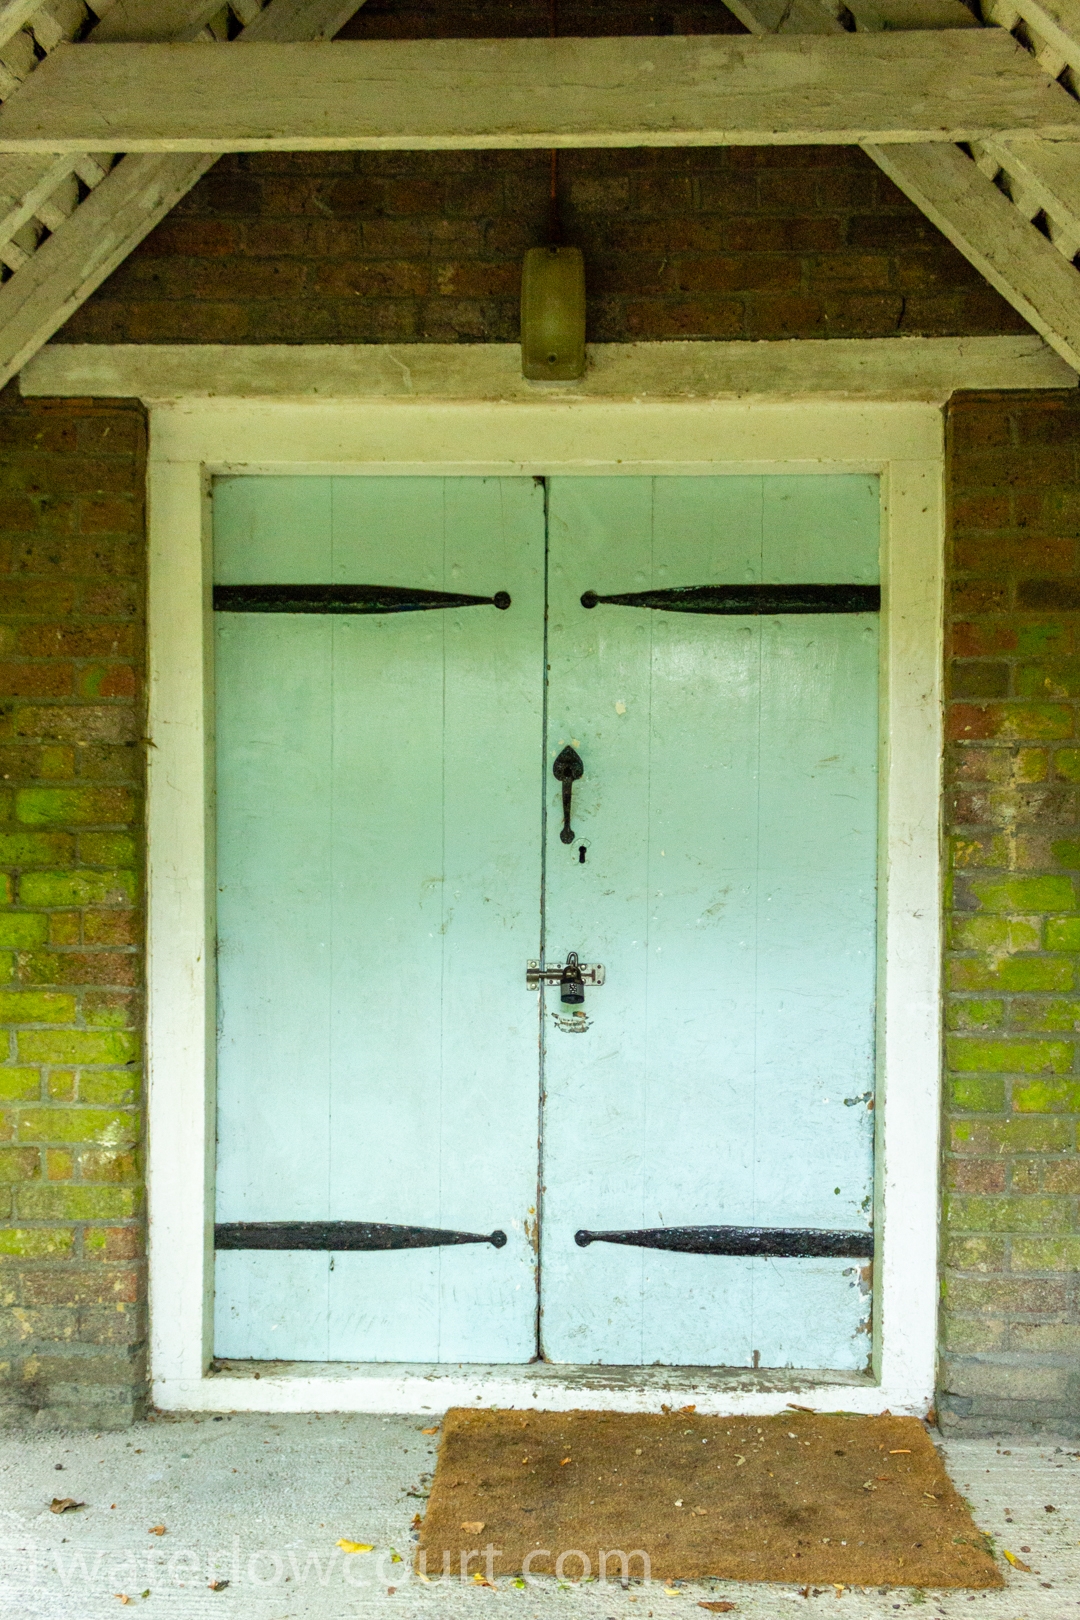 The light-blue oak plank doors on the bicycle shed at Waterlow Court. Waterlow Court is an Arts & Crafts Grade II* listed building, designed by M. H. Baillie Scott, 1909, located in Hampstead Garden Suburb, London NW11 7DT. Flat 1, a one-bedroom, ground-floor flat, is for sale. Listed on Rightmove and Zoopla.